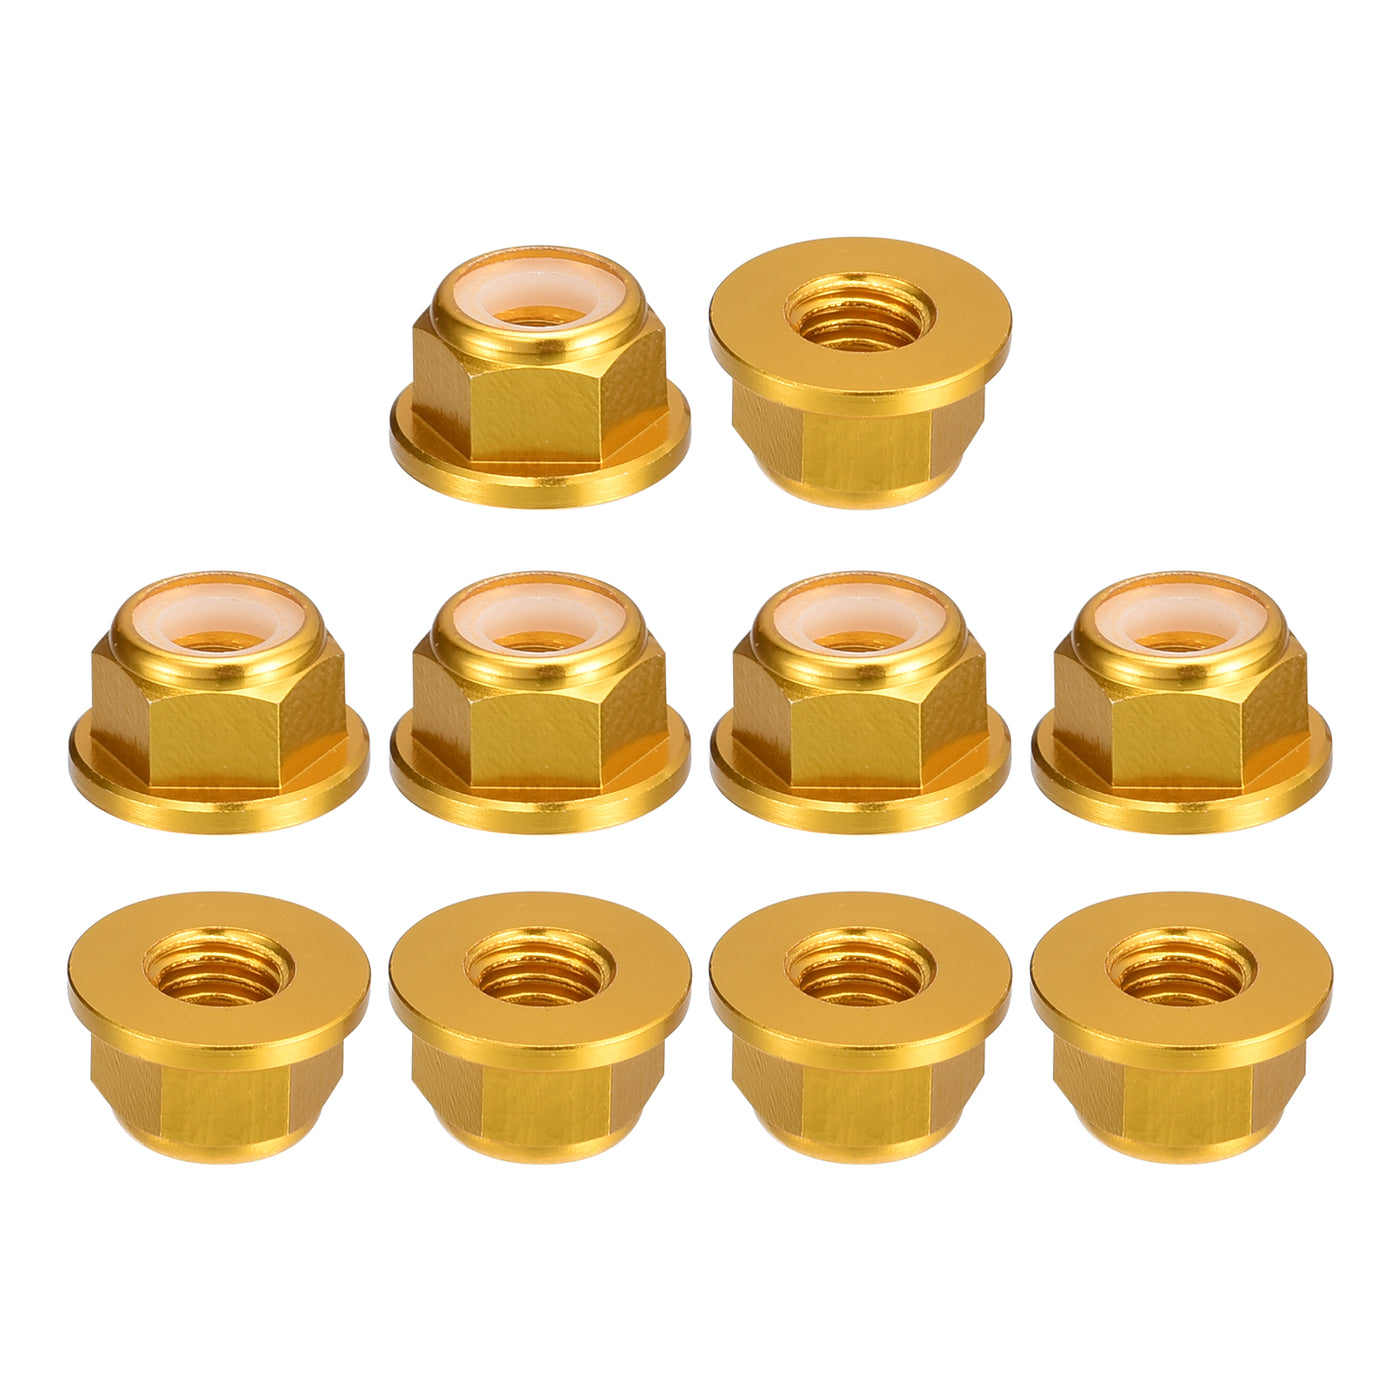 uxcell Uxcell Nylon Insert Hex Lock Nuts, 10pcs - M2 x 0.4mm Aluminum Alloy Self-Locking Nut, Anodizing Flange Lock Nut for Fasteners (Gold)